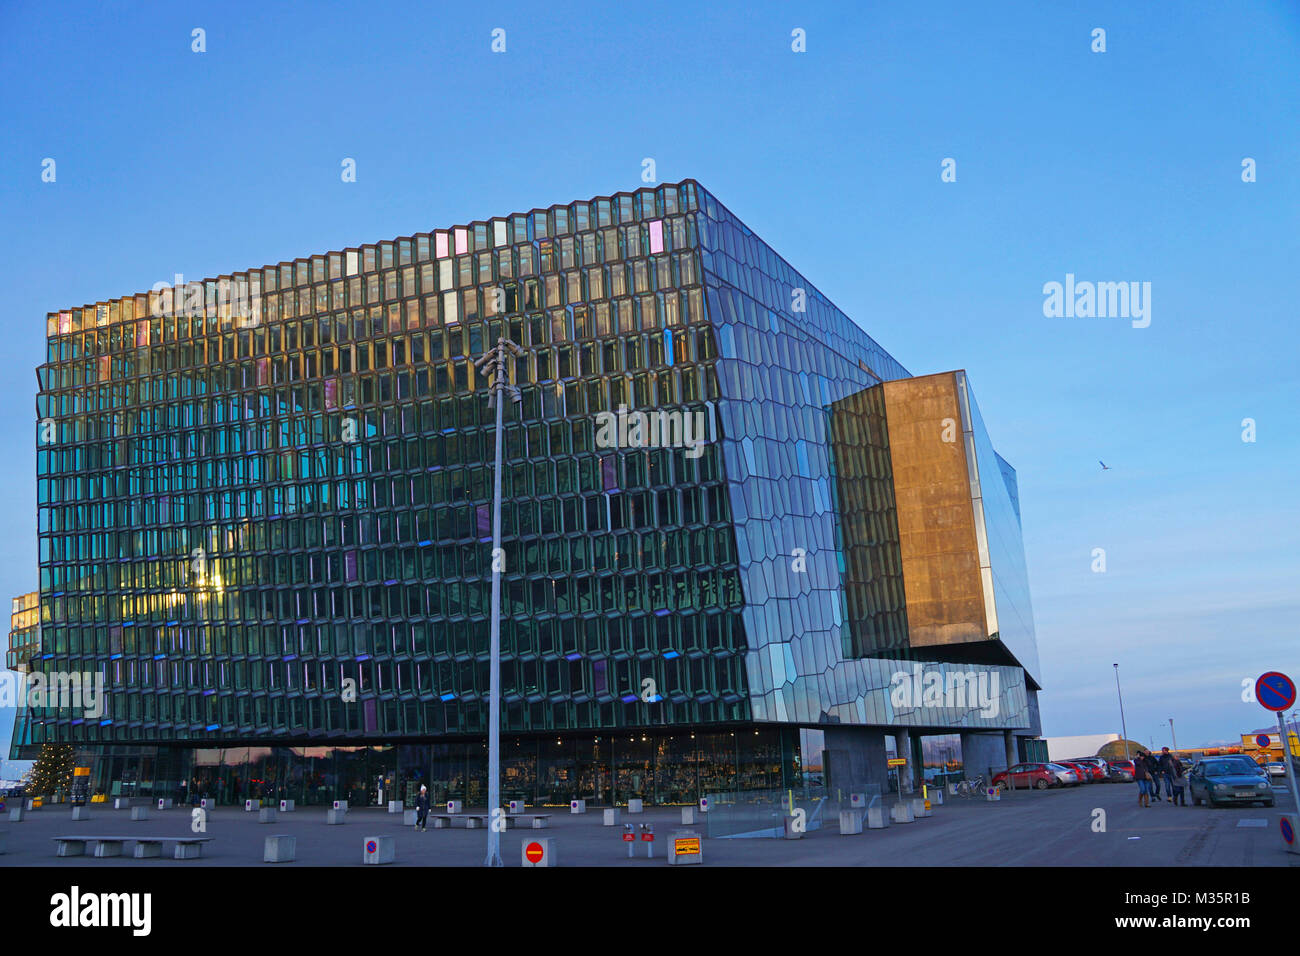 Harpa. the striking concert hall and conference centre in Reykjavik, Iceland. Stock Photo